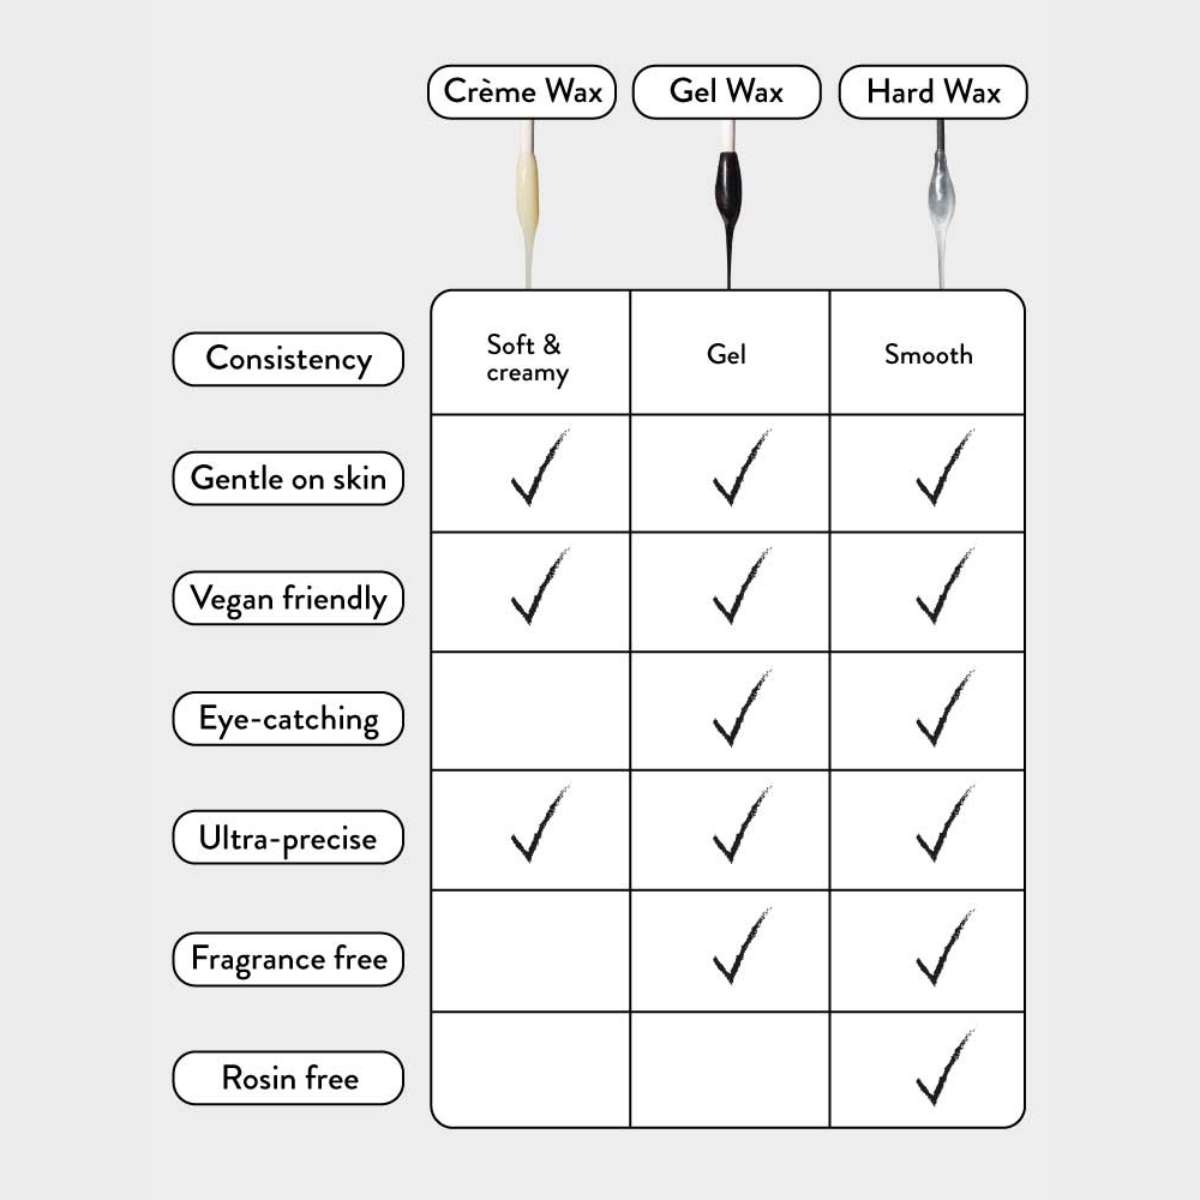 Table comparing the features and benefits of the HD Brows creme, gel and hard waxes